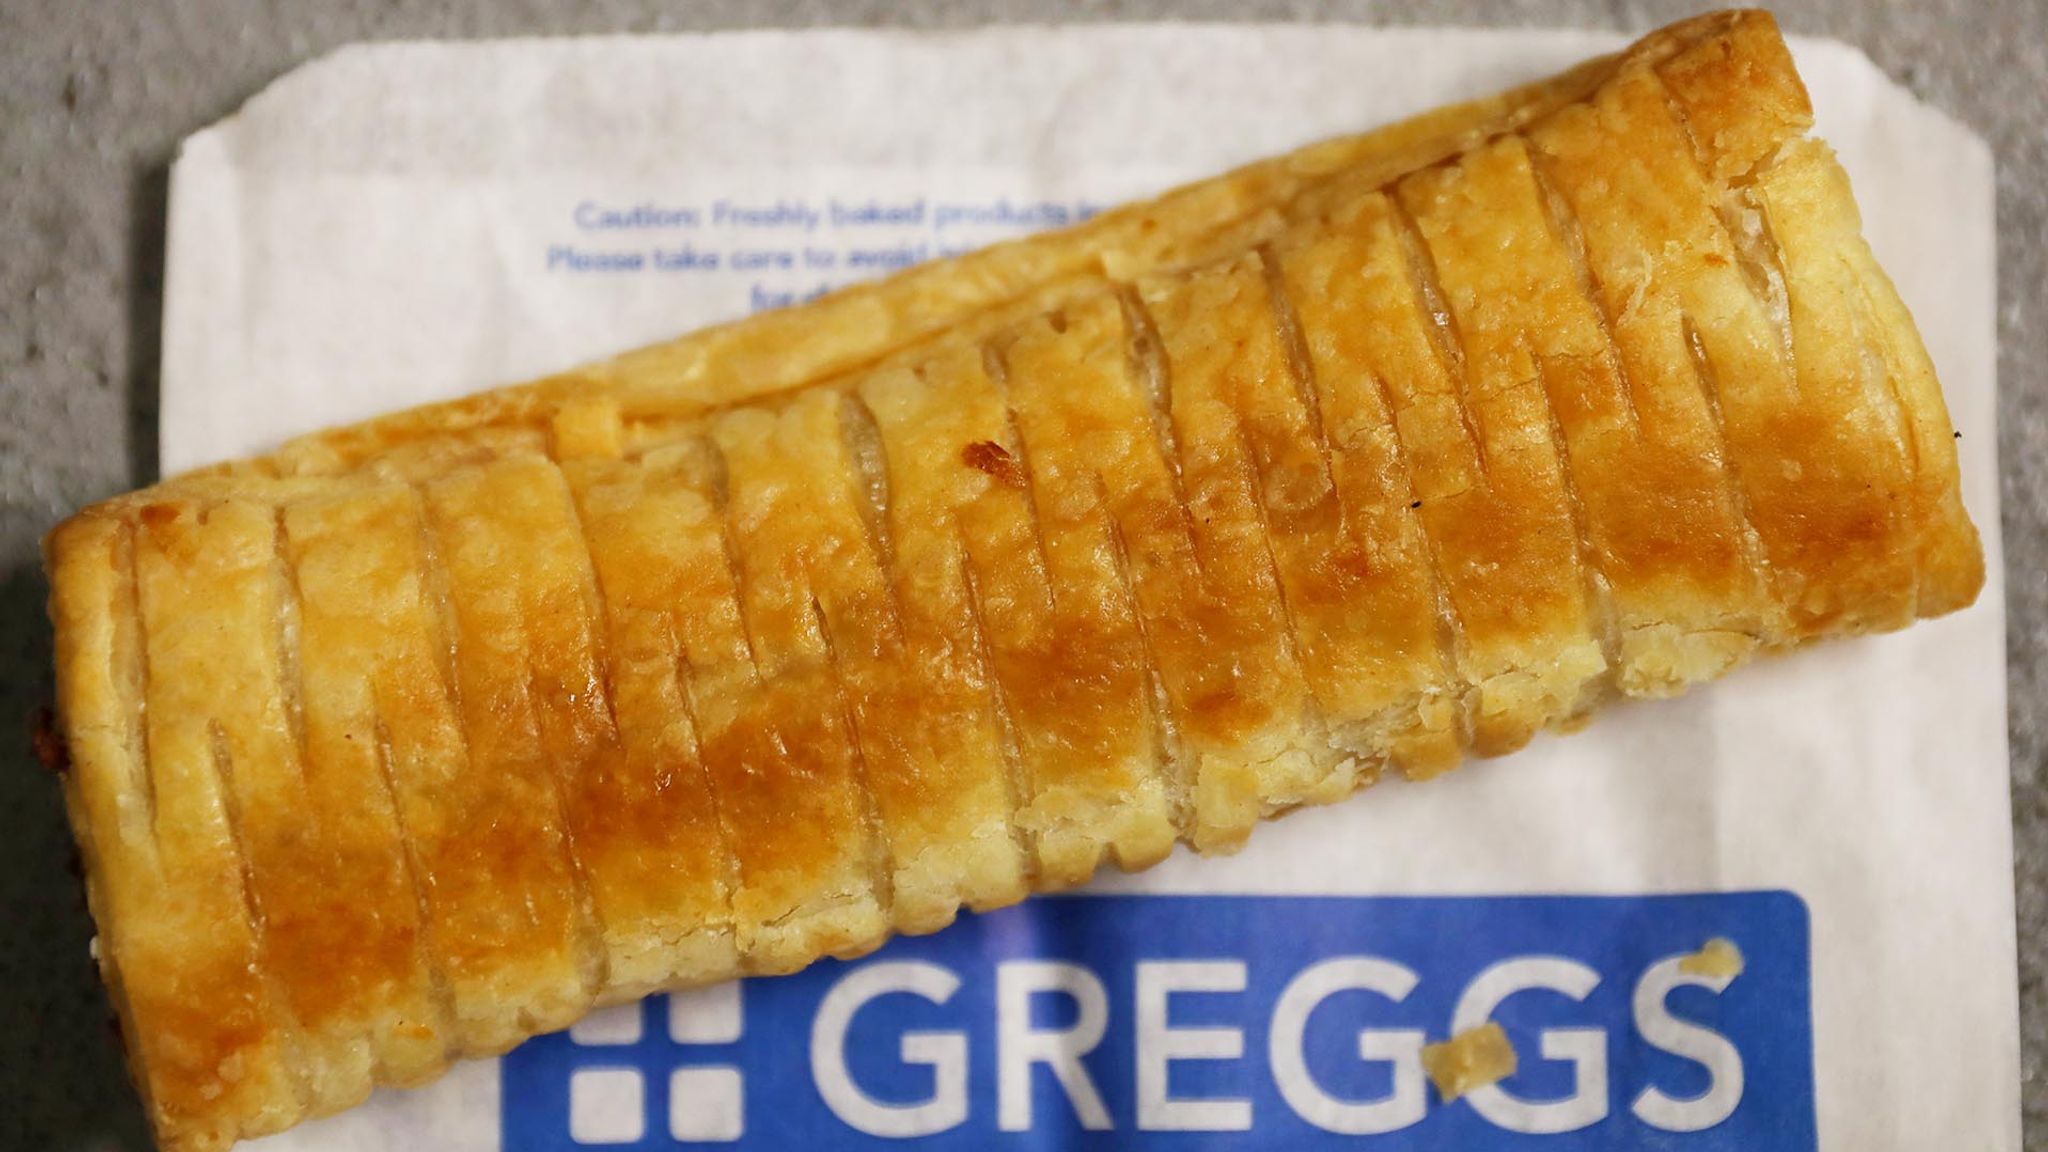 Greggs vegan sausage roll hit by supply chain disruption